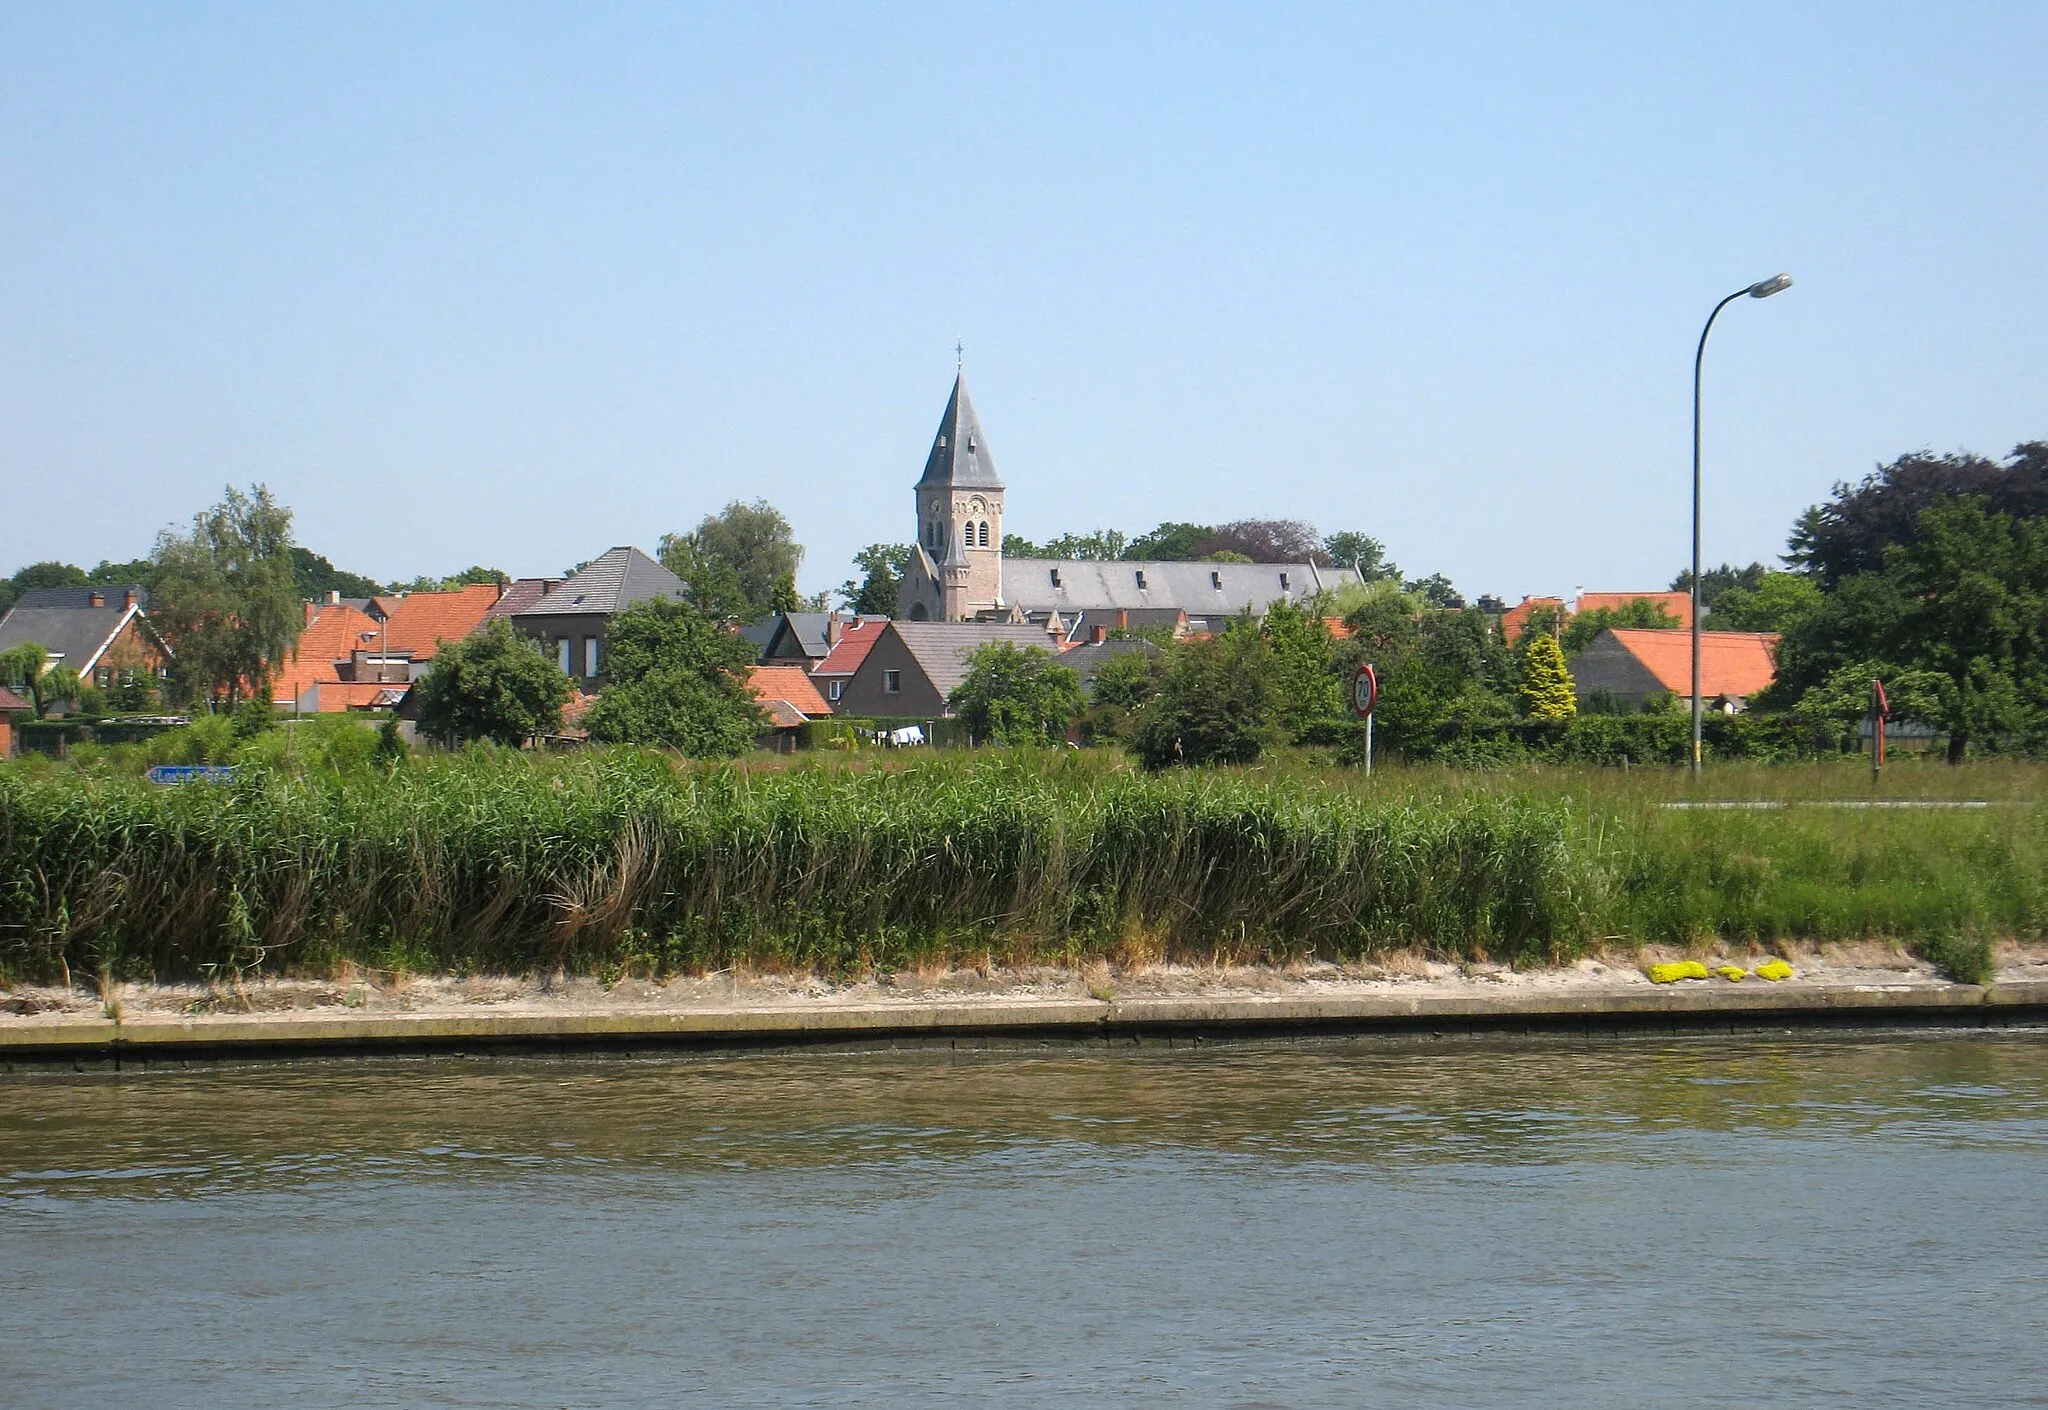 Photo showing: Lovendegem, seen across the Gent-Brugge canal